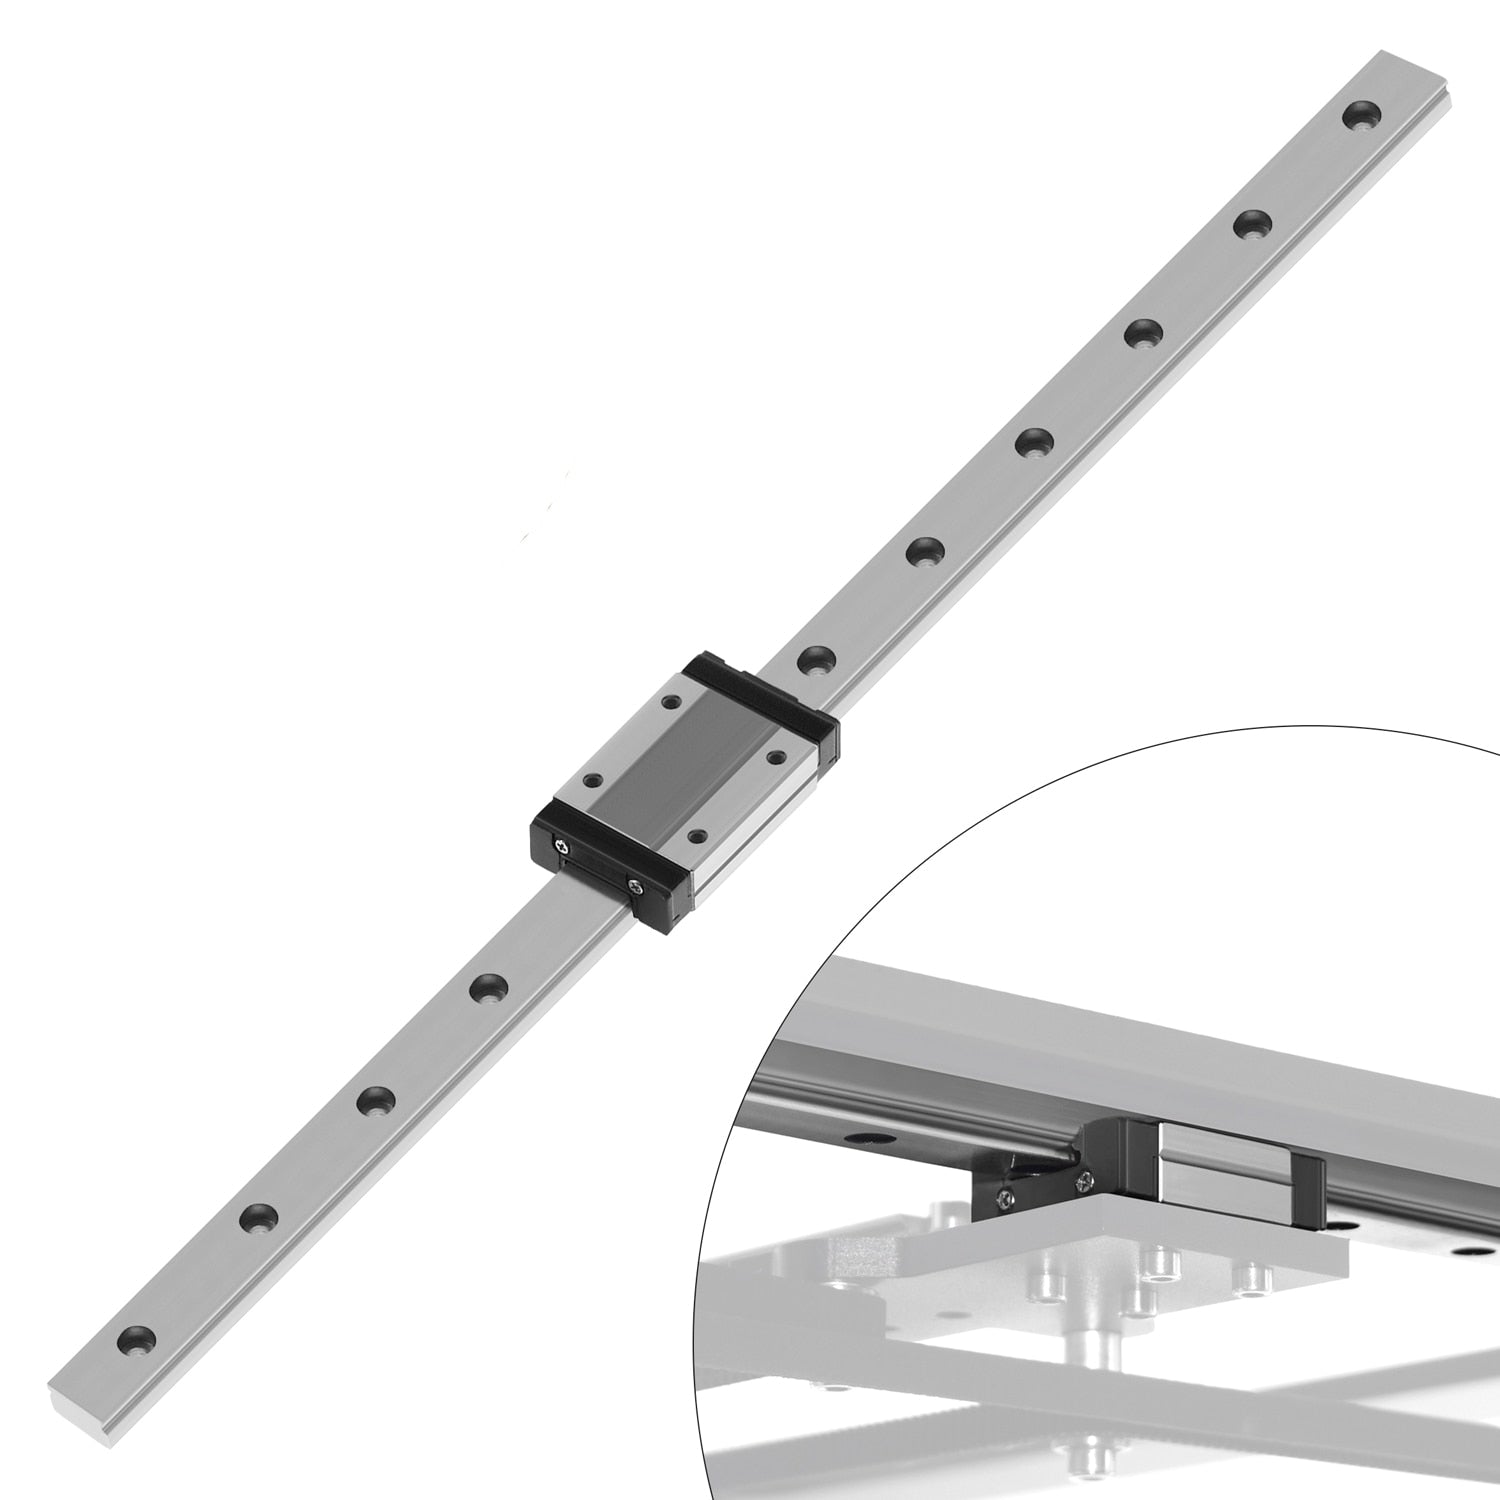 MGN9/MGN12 Miniature Linear Guide Rail - Various Length Options with Carriage